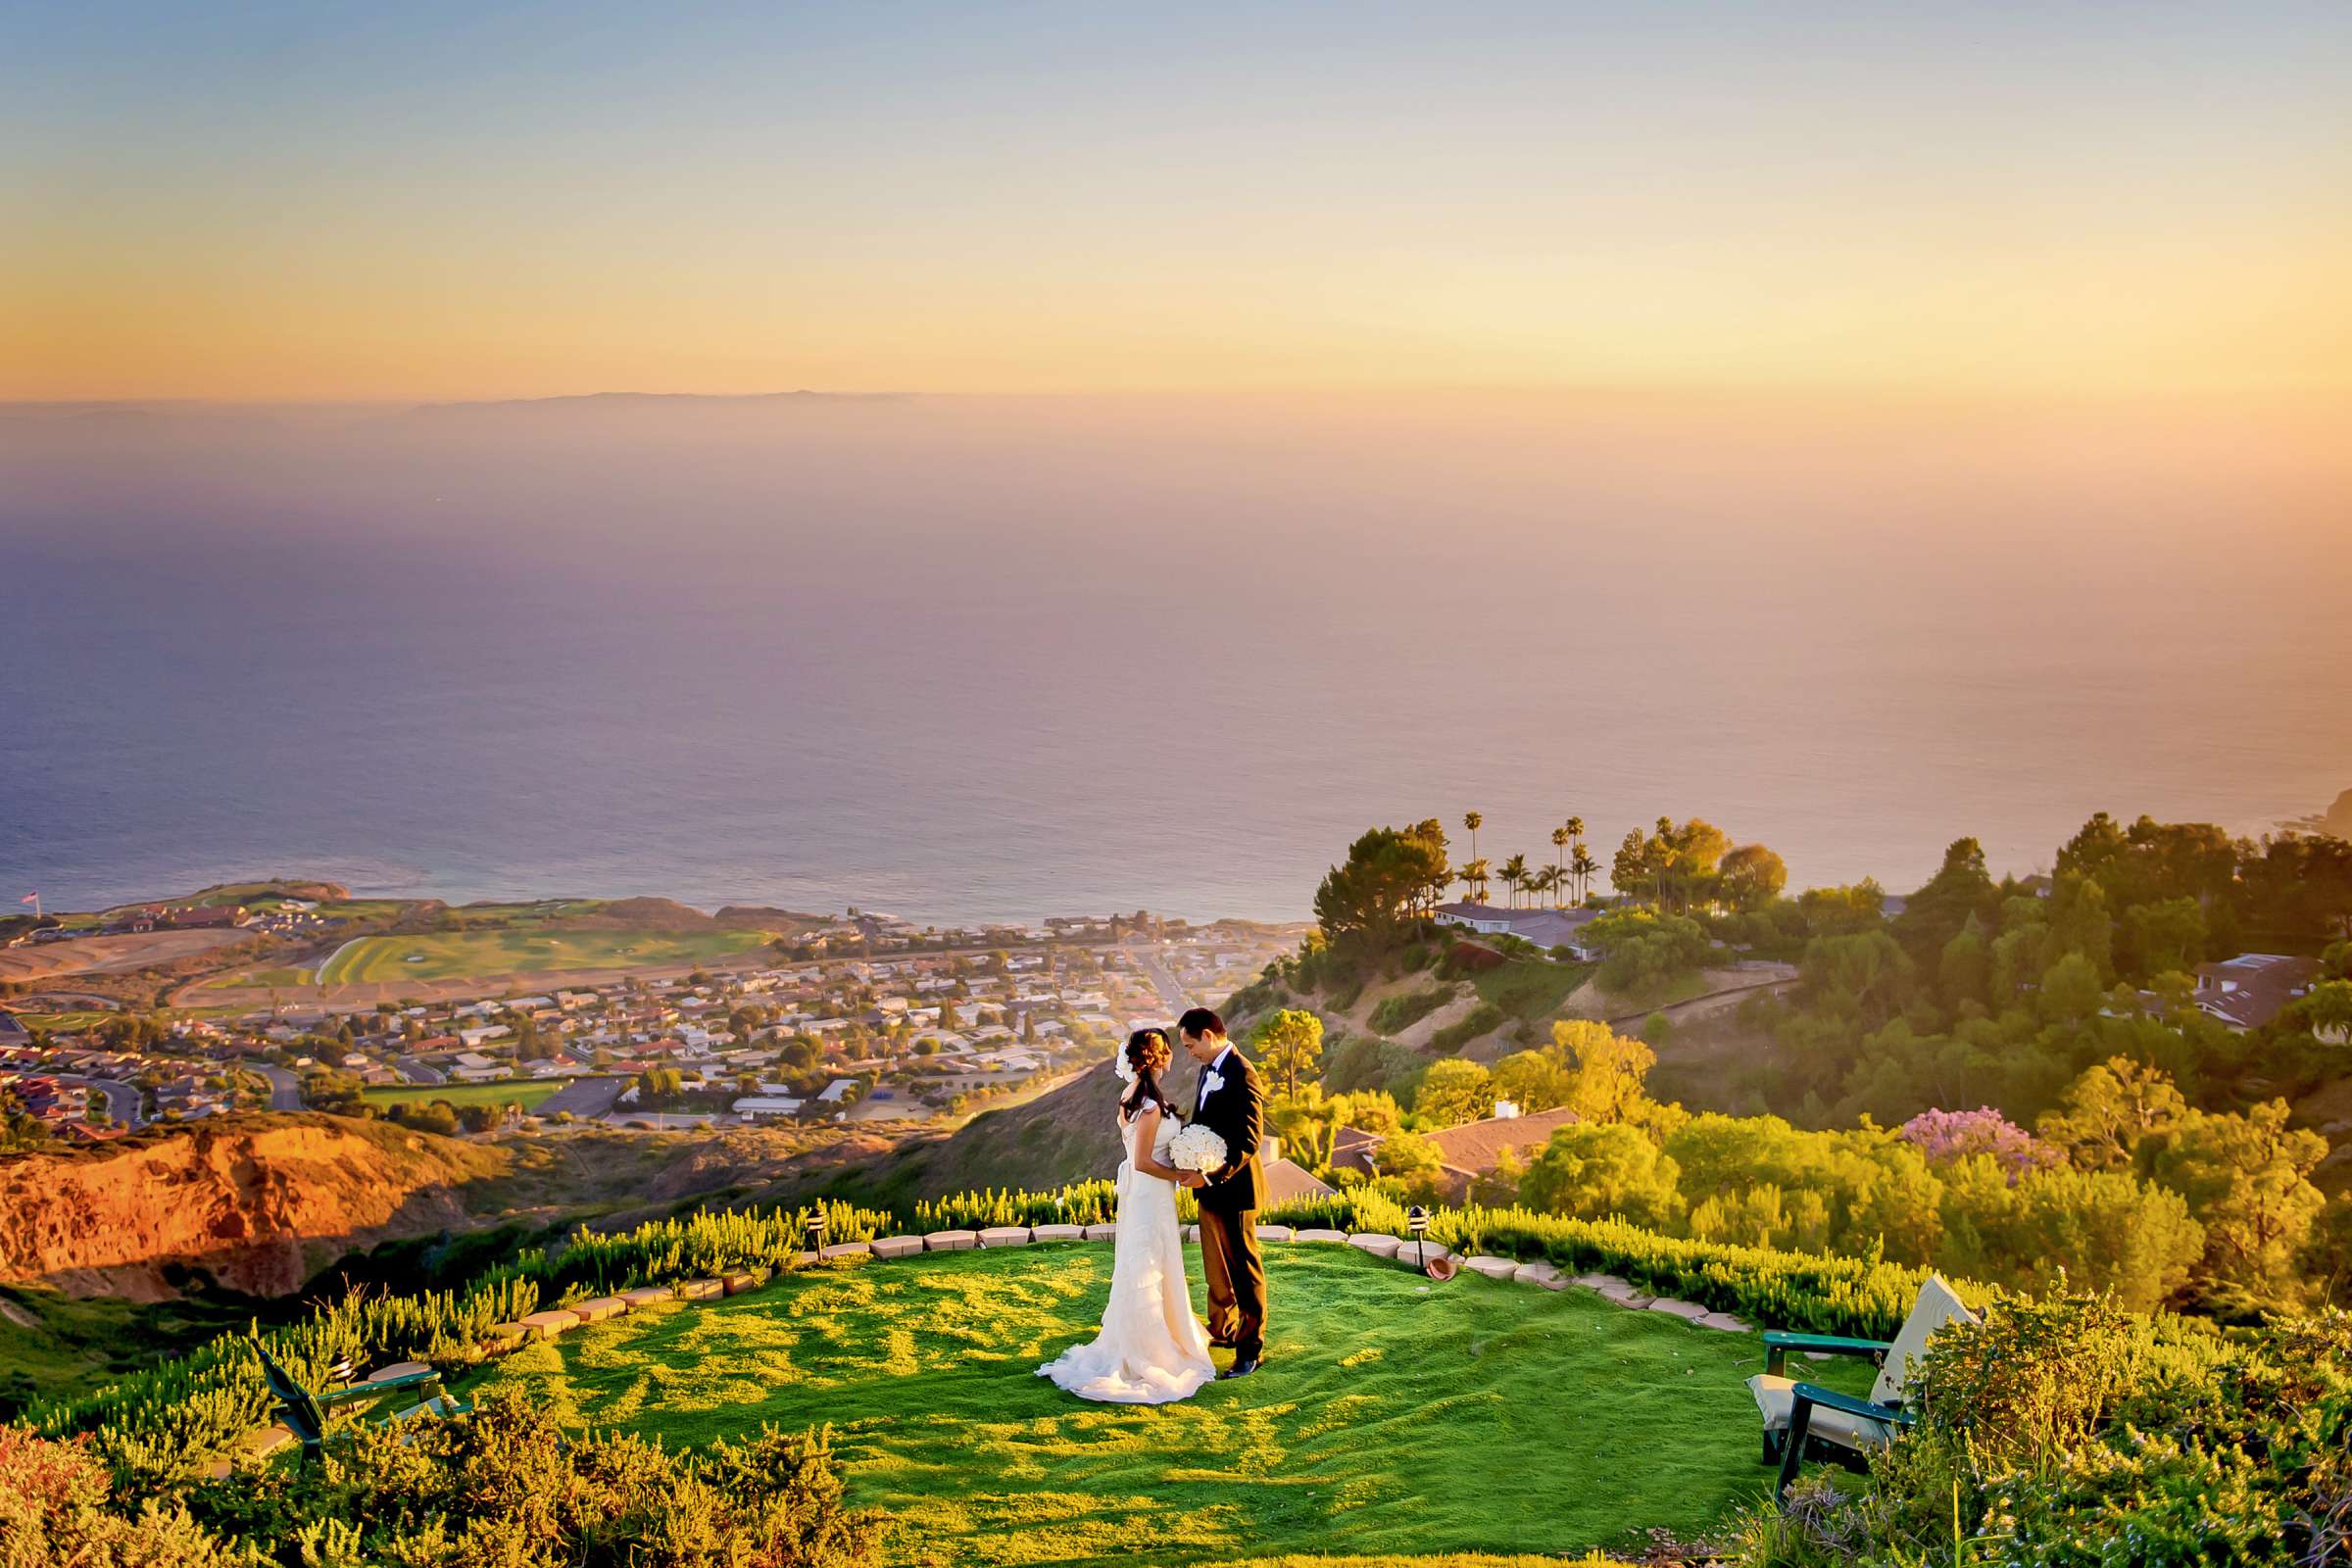 Sunset, Romantic moment at Wedding, Sarah and Thomas Wedding Photo #1 by True Photography